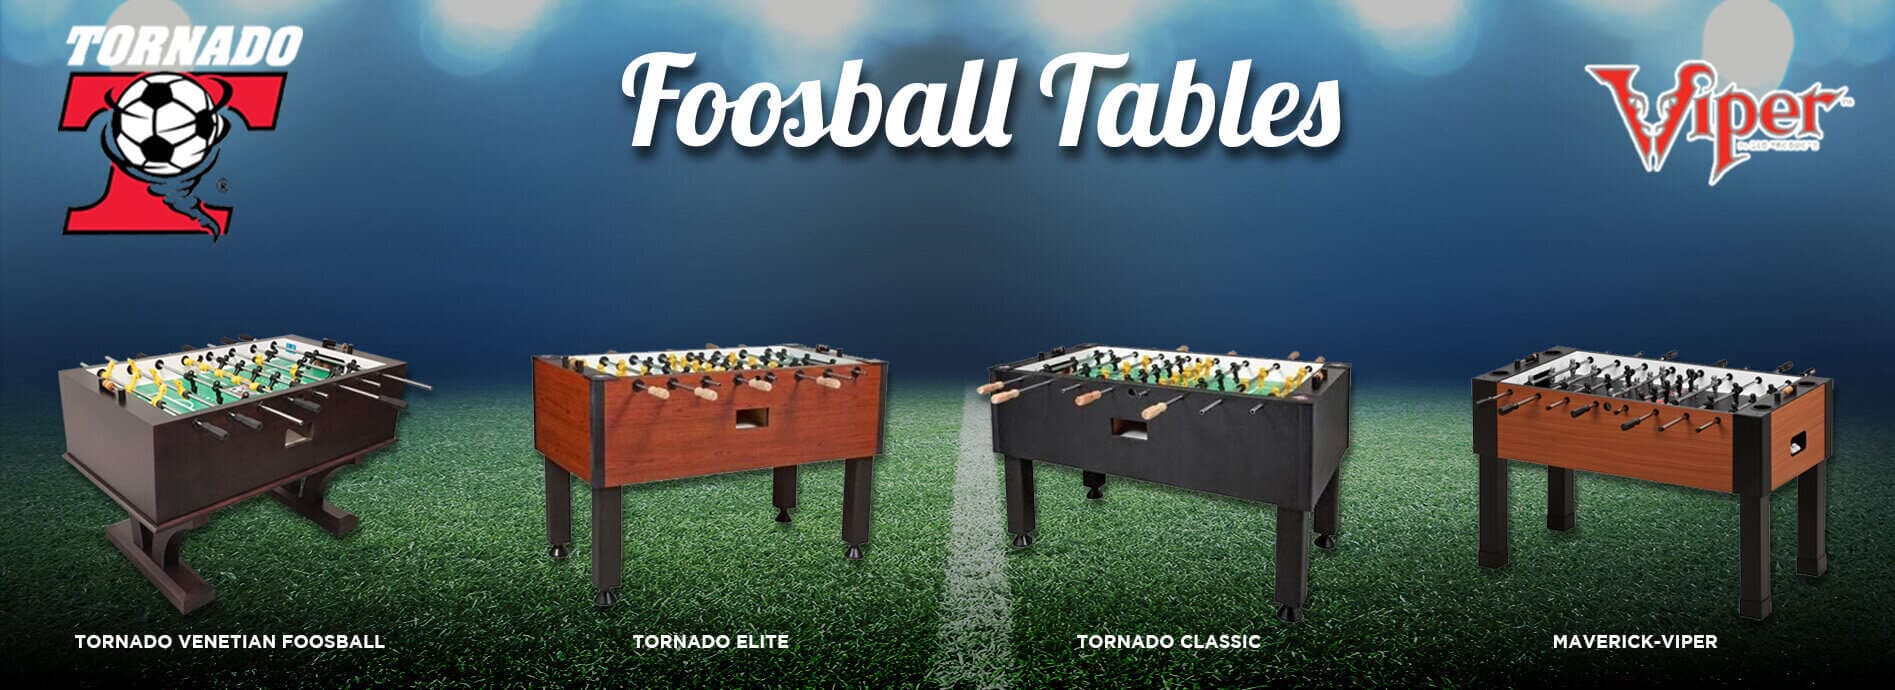 foosball tables for home or business